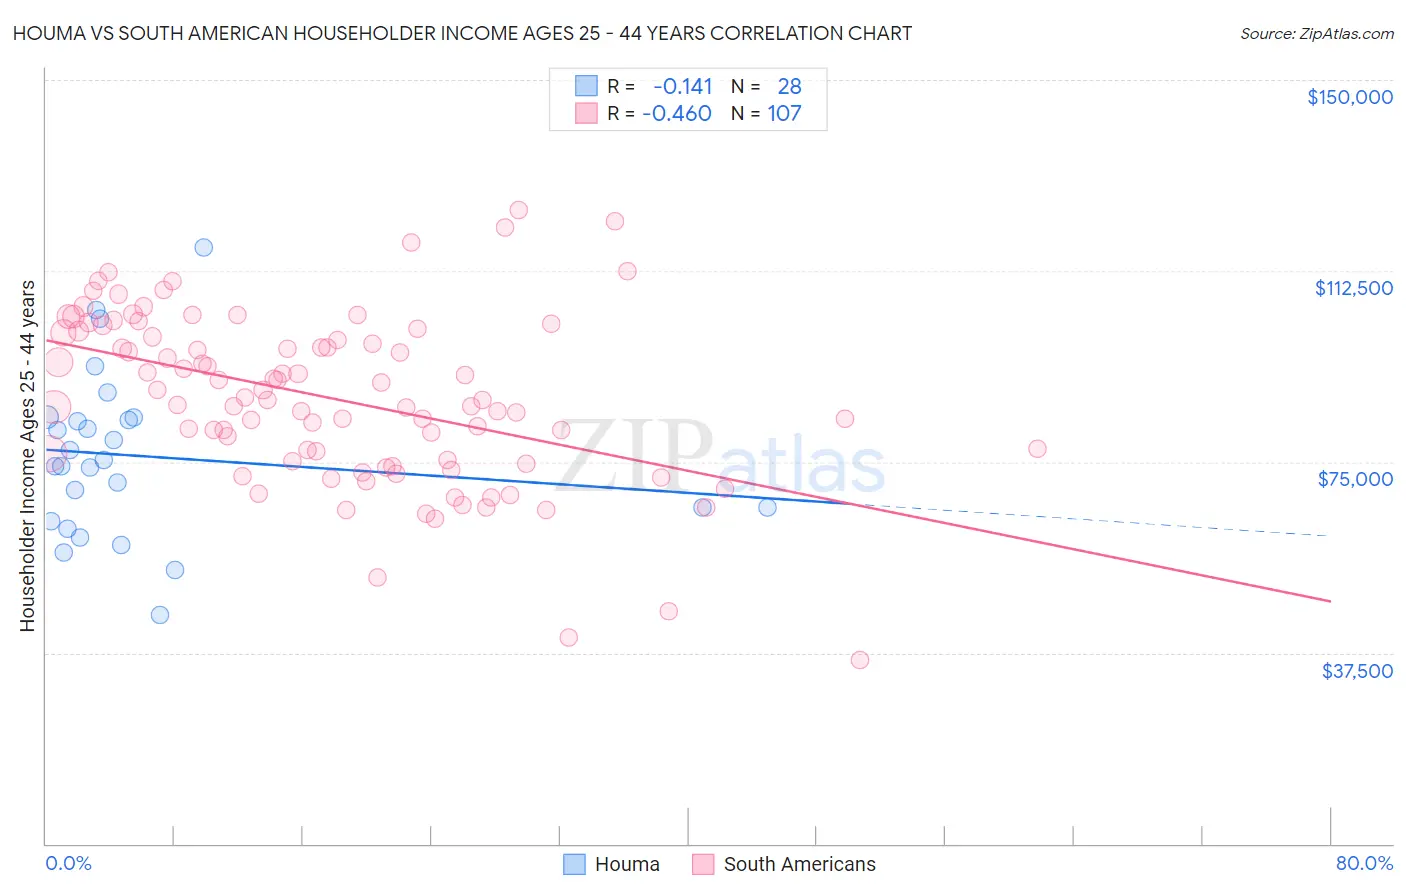 Houma vs South American Householder Income Ages 25 - 44 years